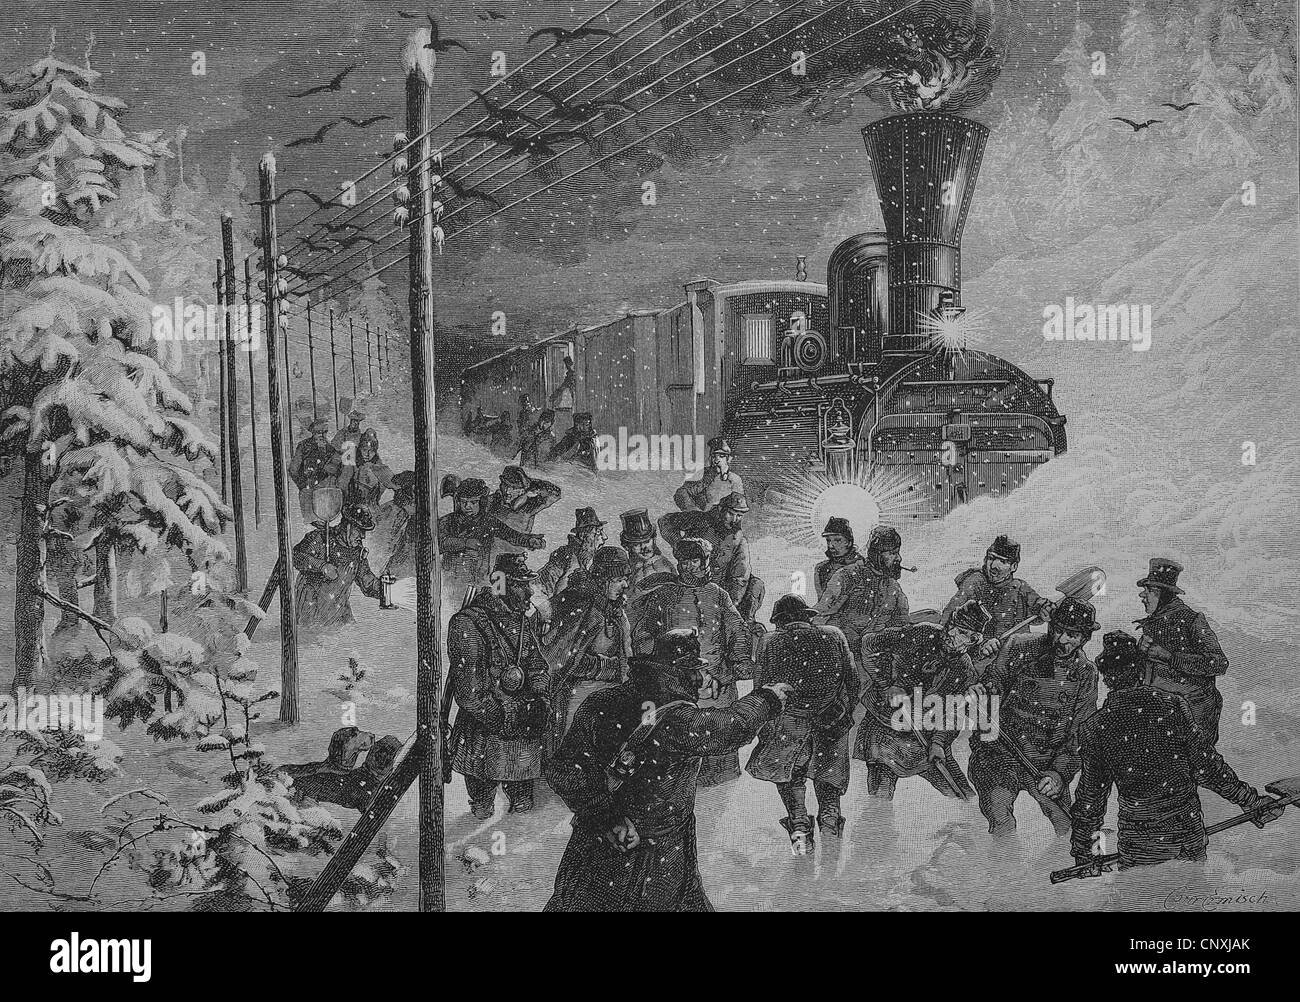 Train stuck in snow being shoveled free, historical engraving, 1883 Stock Photo